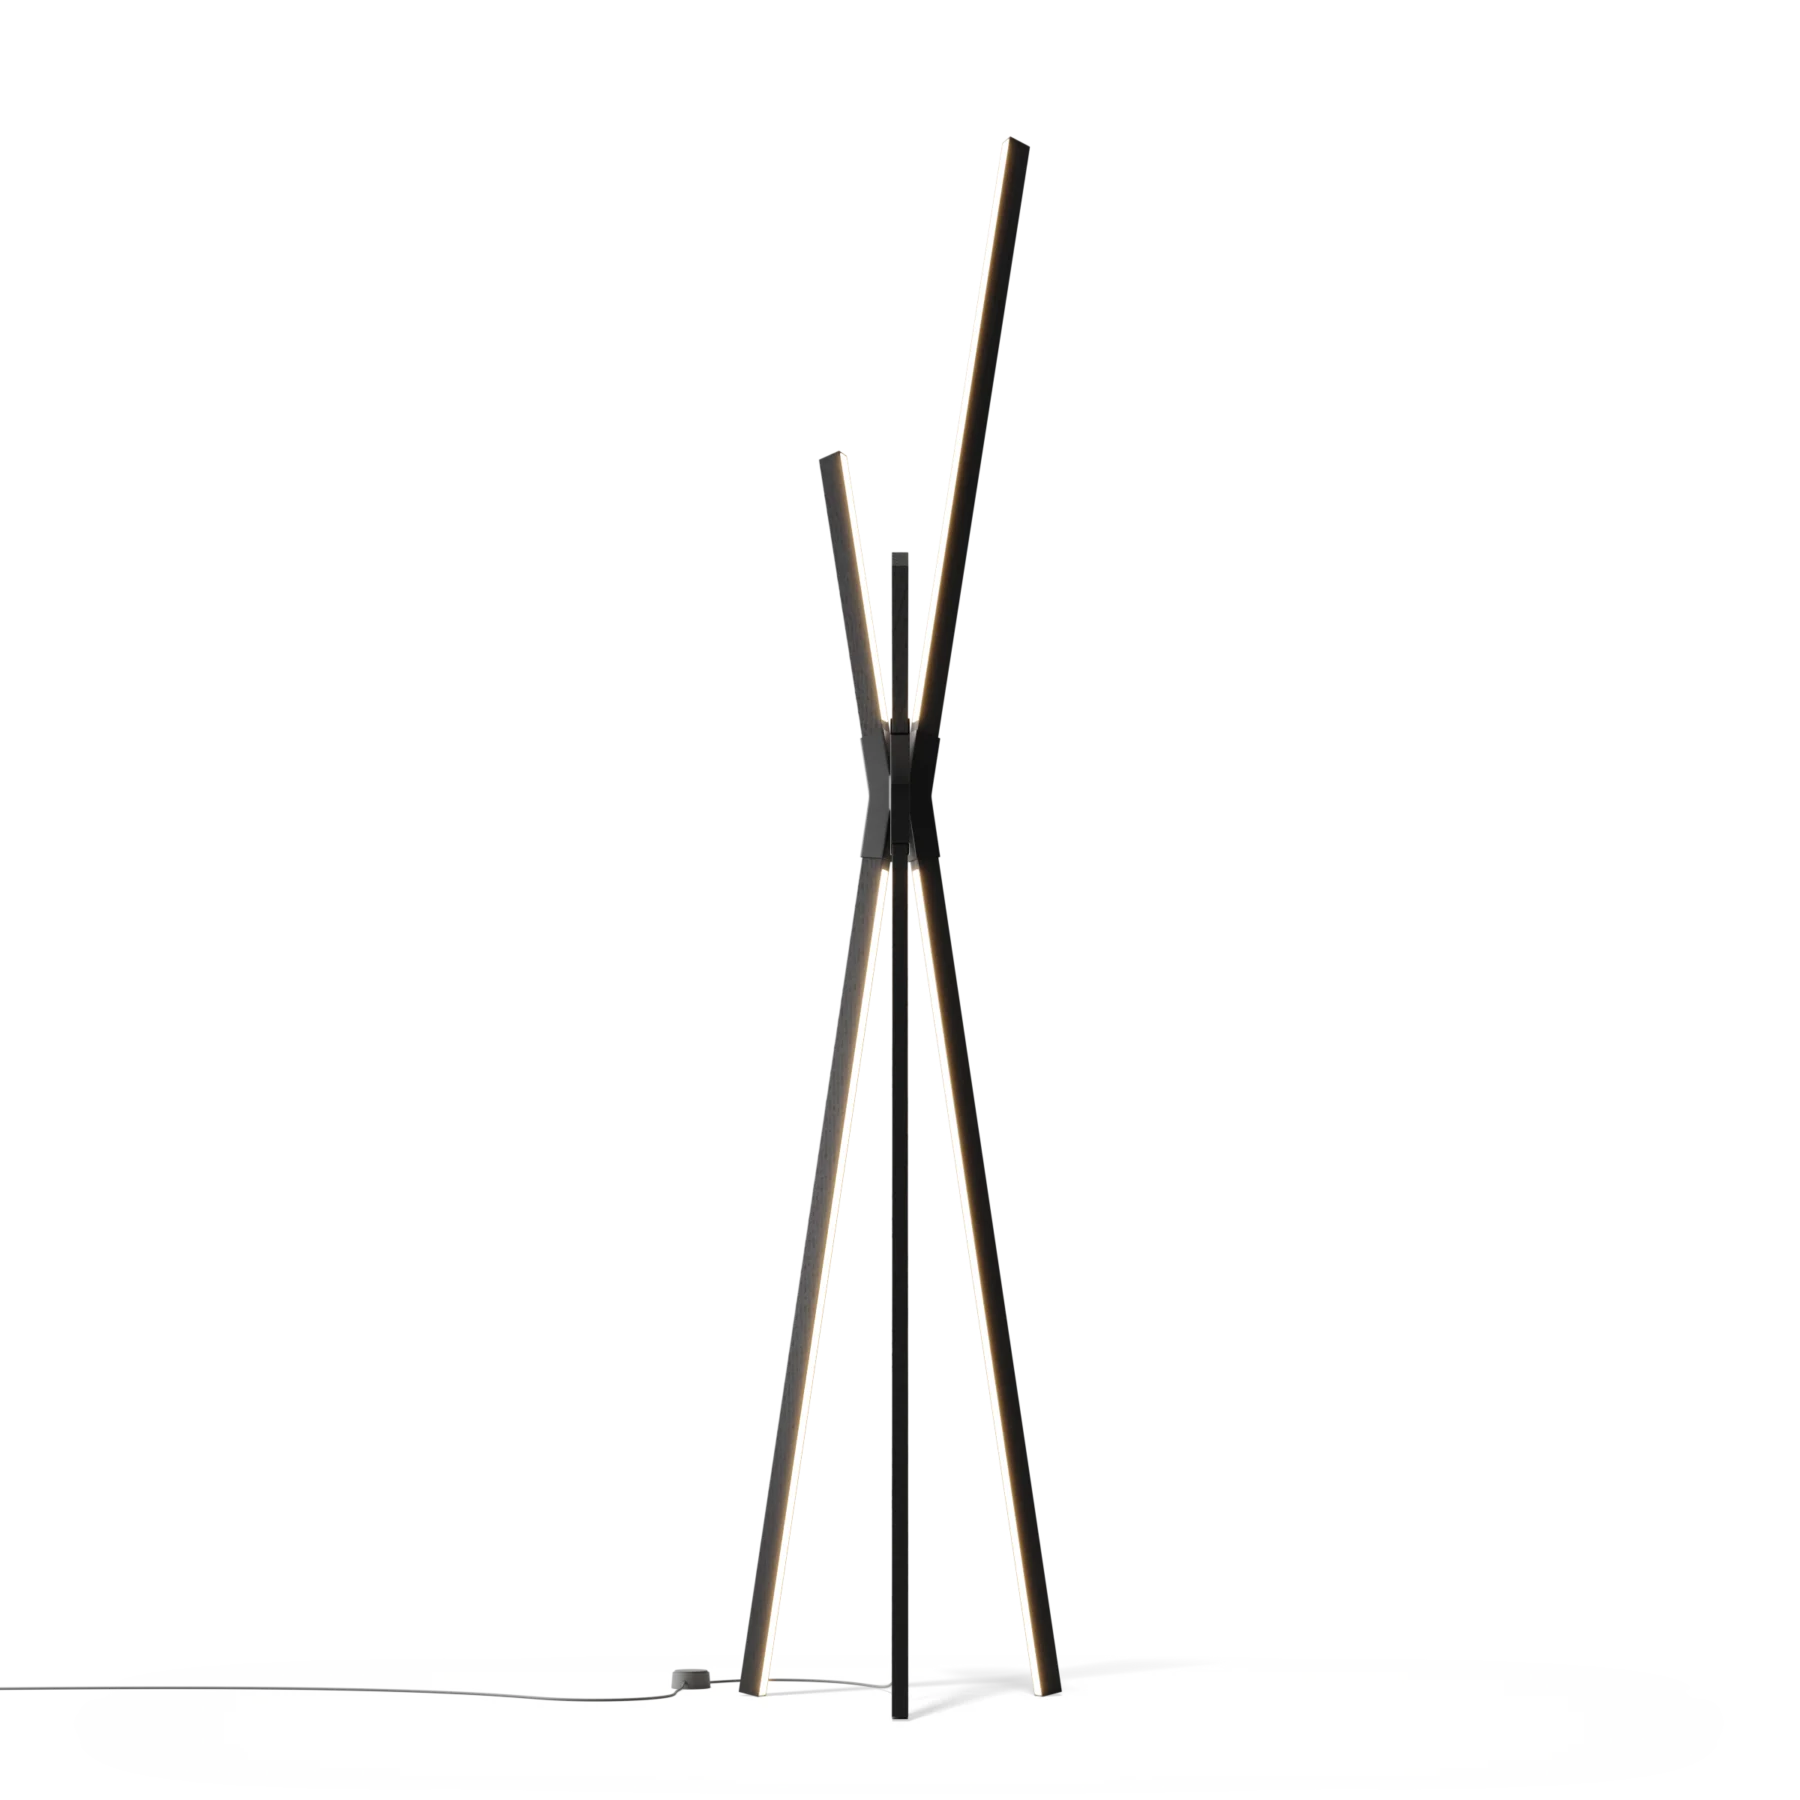 Image of a Stickbulb Floor Bang lighting fixture. The modern fixture consists of sleek wooden beams with multiple integrated LED bulbs. The bulbs emit warm, diffused light, casting a gentle glow in the surrounding space. The wooden beam is suspended from thin cables, giving it a floating appearance.